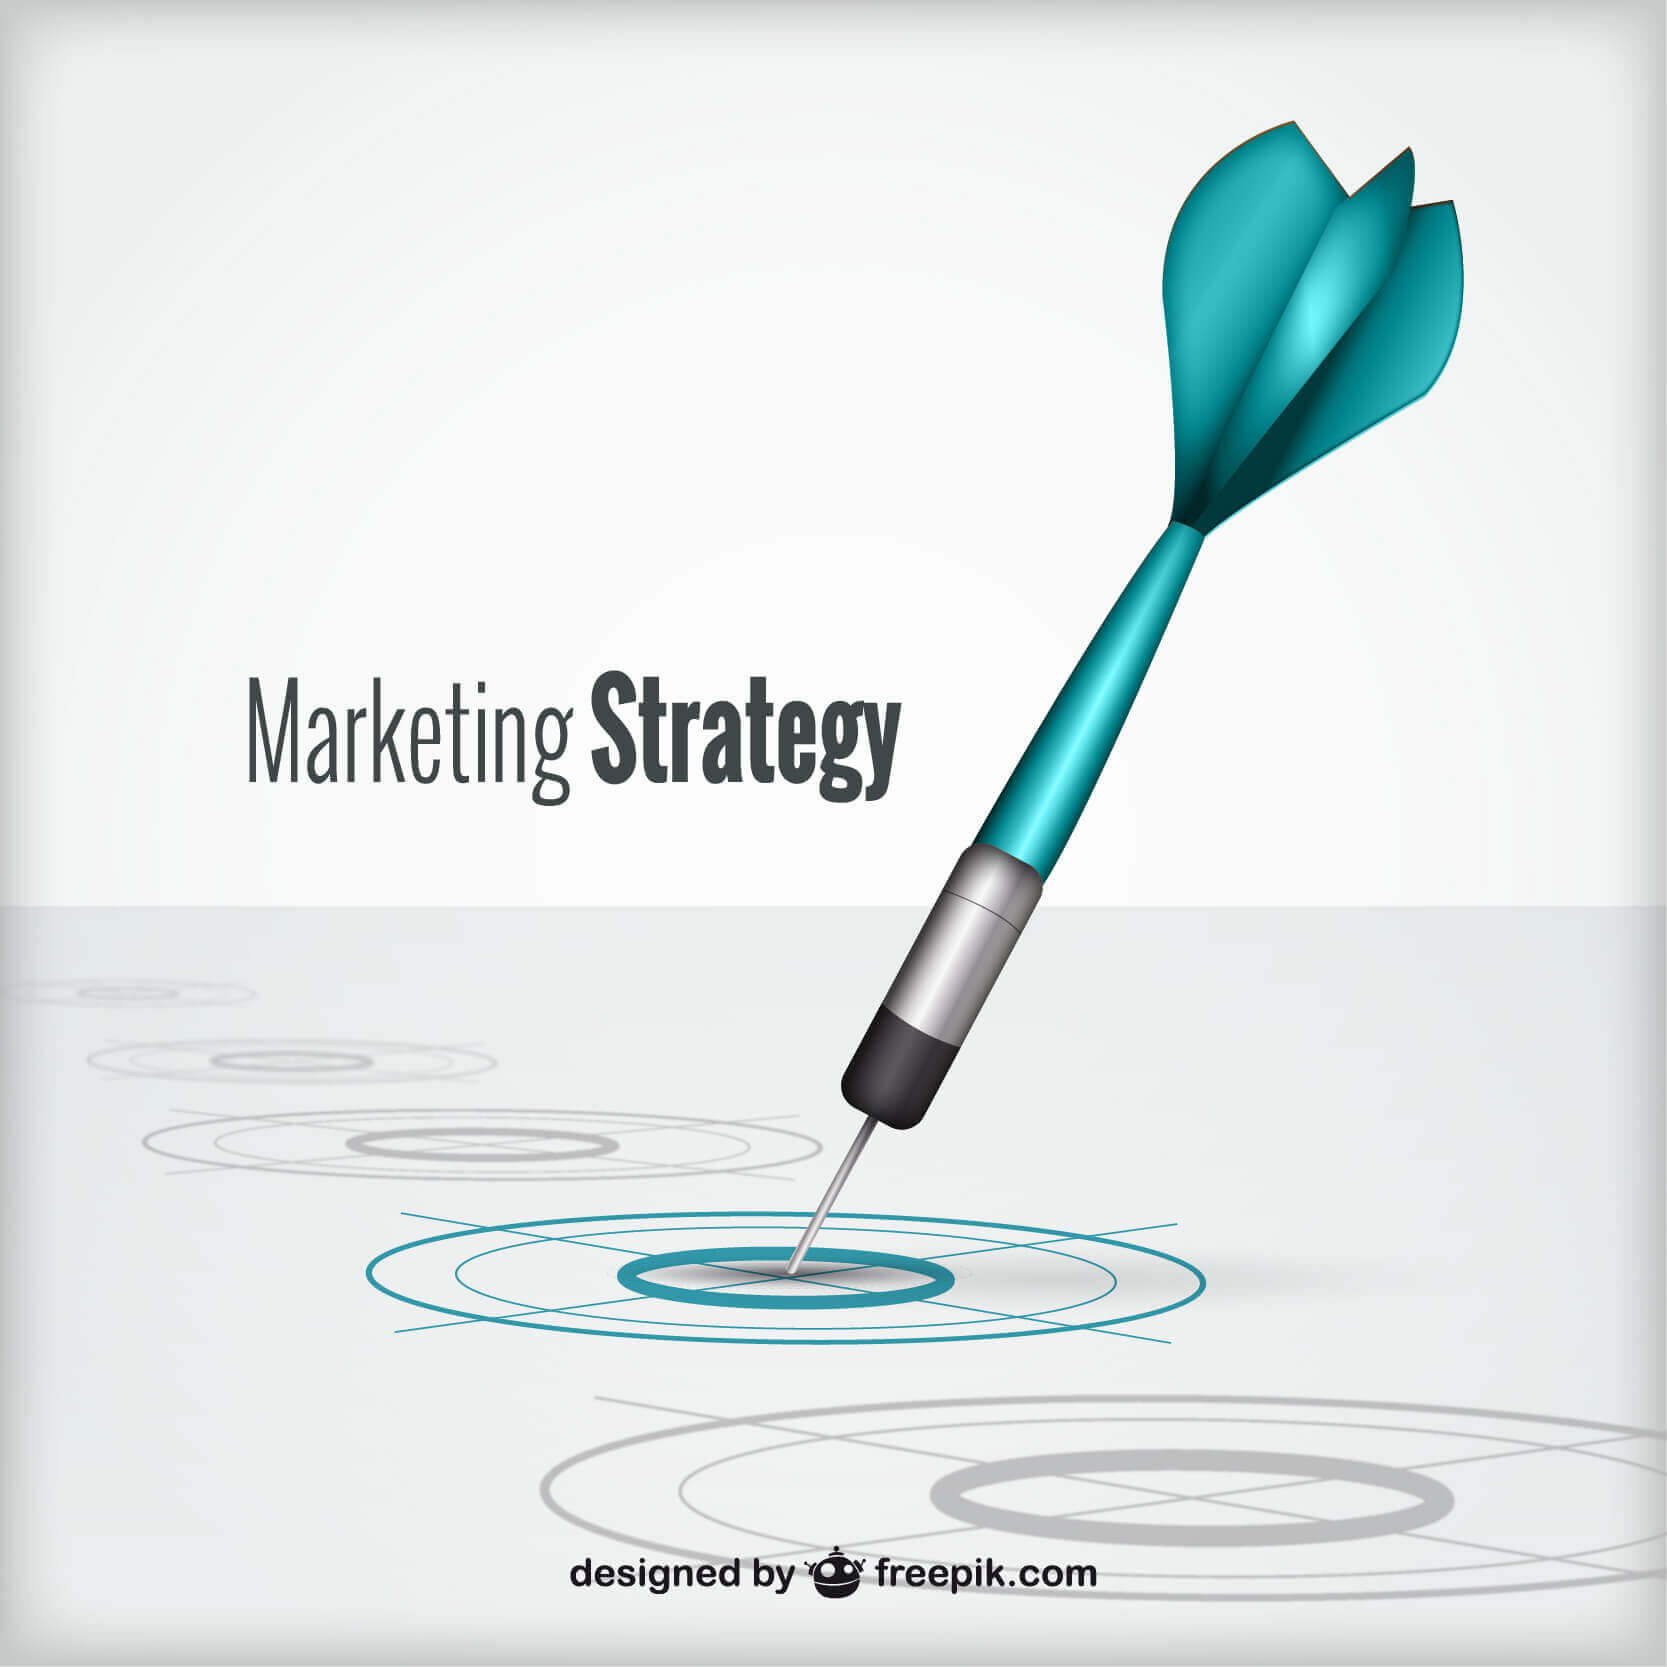 Marketing strategy concept illustrated with a dart pin